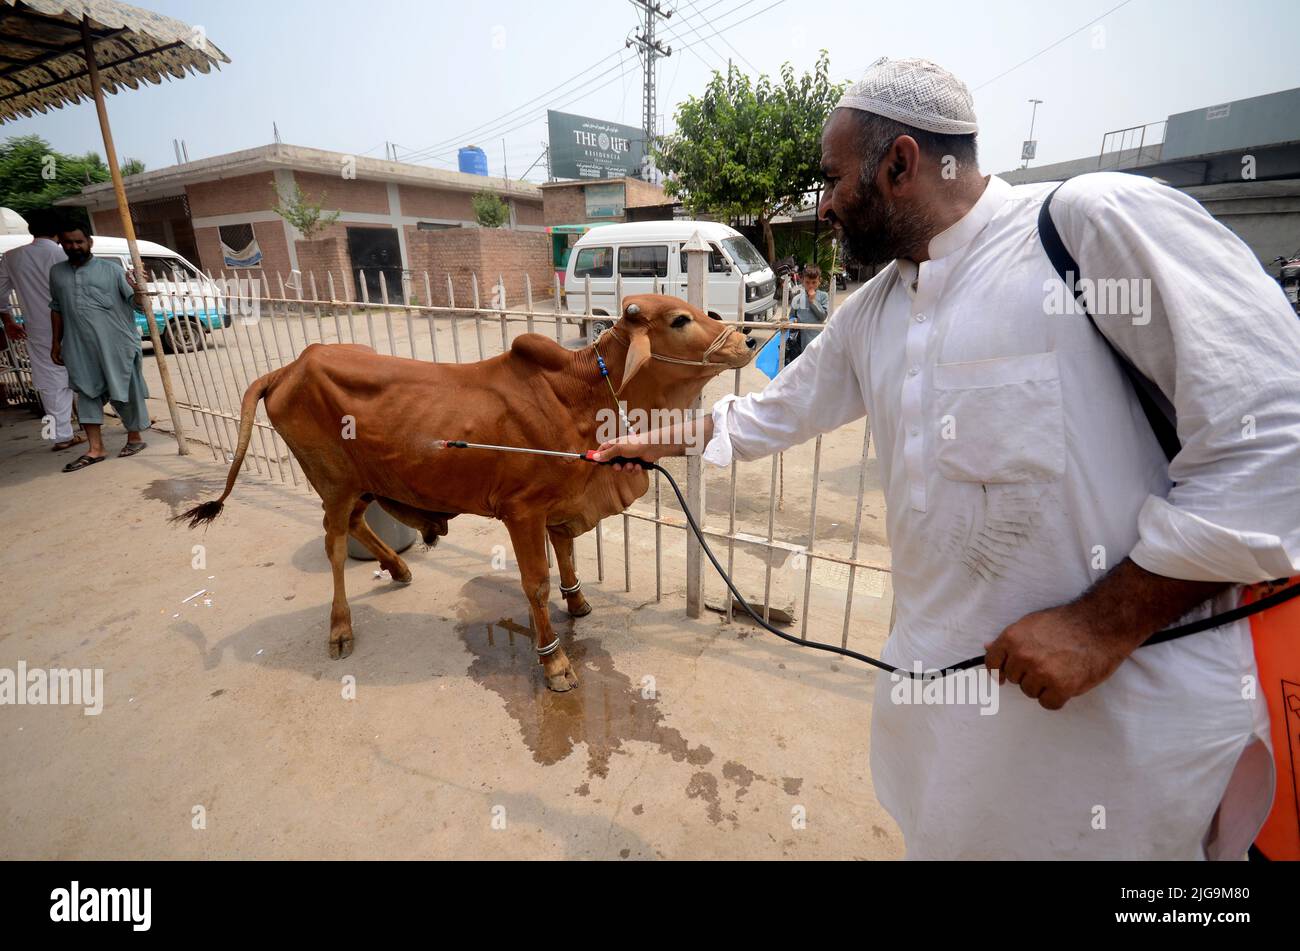 July 6, 2022, Peshawar, Khyber Pakhtunkhwa, Pakistan: PESHAWAR, PAKISTAN 6 JULY: The number of lumpy skin disease cases has crossed the 10,000 mark in Khyber Pakhtunkhwa after 1,238 more cases were reported in a single day, a report of the livestock department said at Kala Mandi G.T Road Peshawar Pakistan on Wednesday, 6 July 2022.A veterinary worker is spraying on the sacrificial animals against Lumpy Skin Disease and Congo fever as people are buying cattle for sacrifice in connection with Eid-ul-Azha at Veterinary Hospital at Chargano Chowk in Peshawar Pakistan Friday, 8 July 2022. (Credit Stock Photo